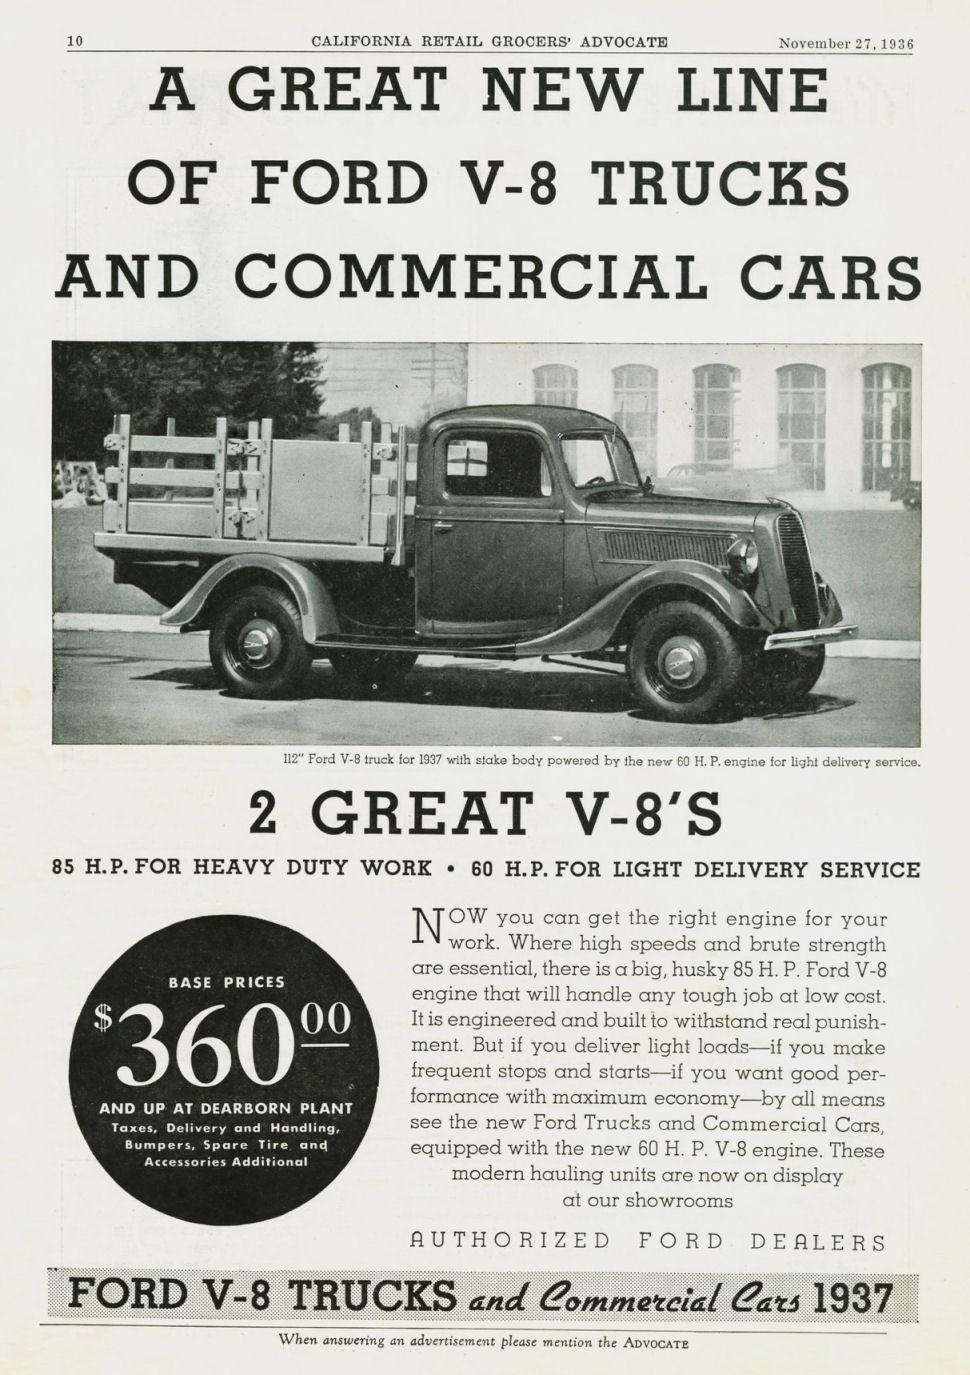 CLASSIC FORD TRUCKS | ANTIQUE VINTAGE FORD TRUCKS FOR SALE